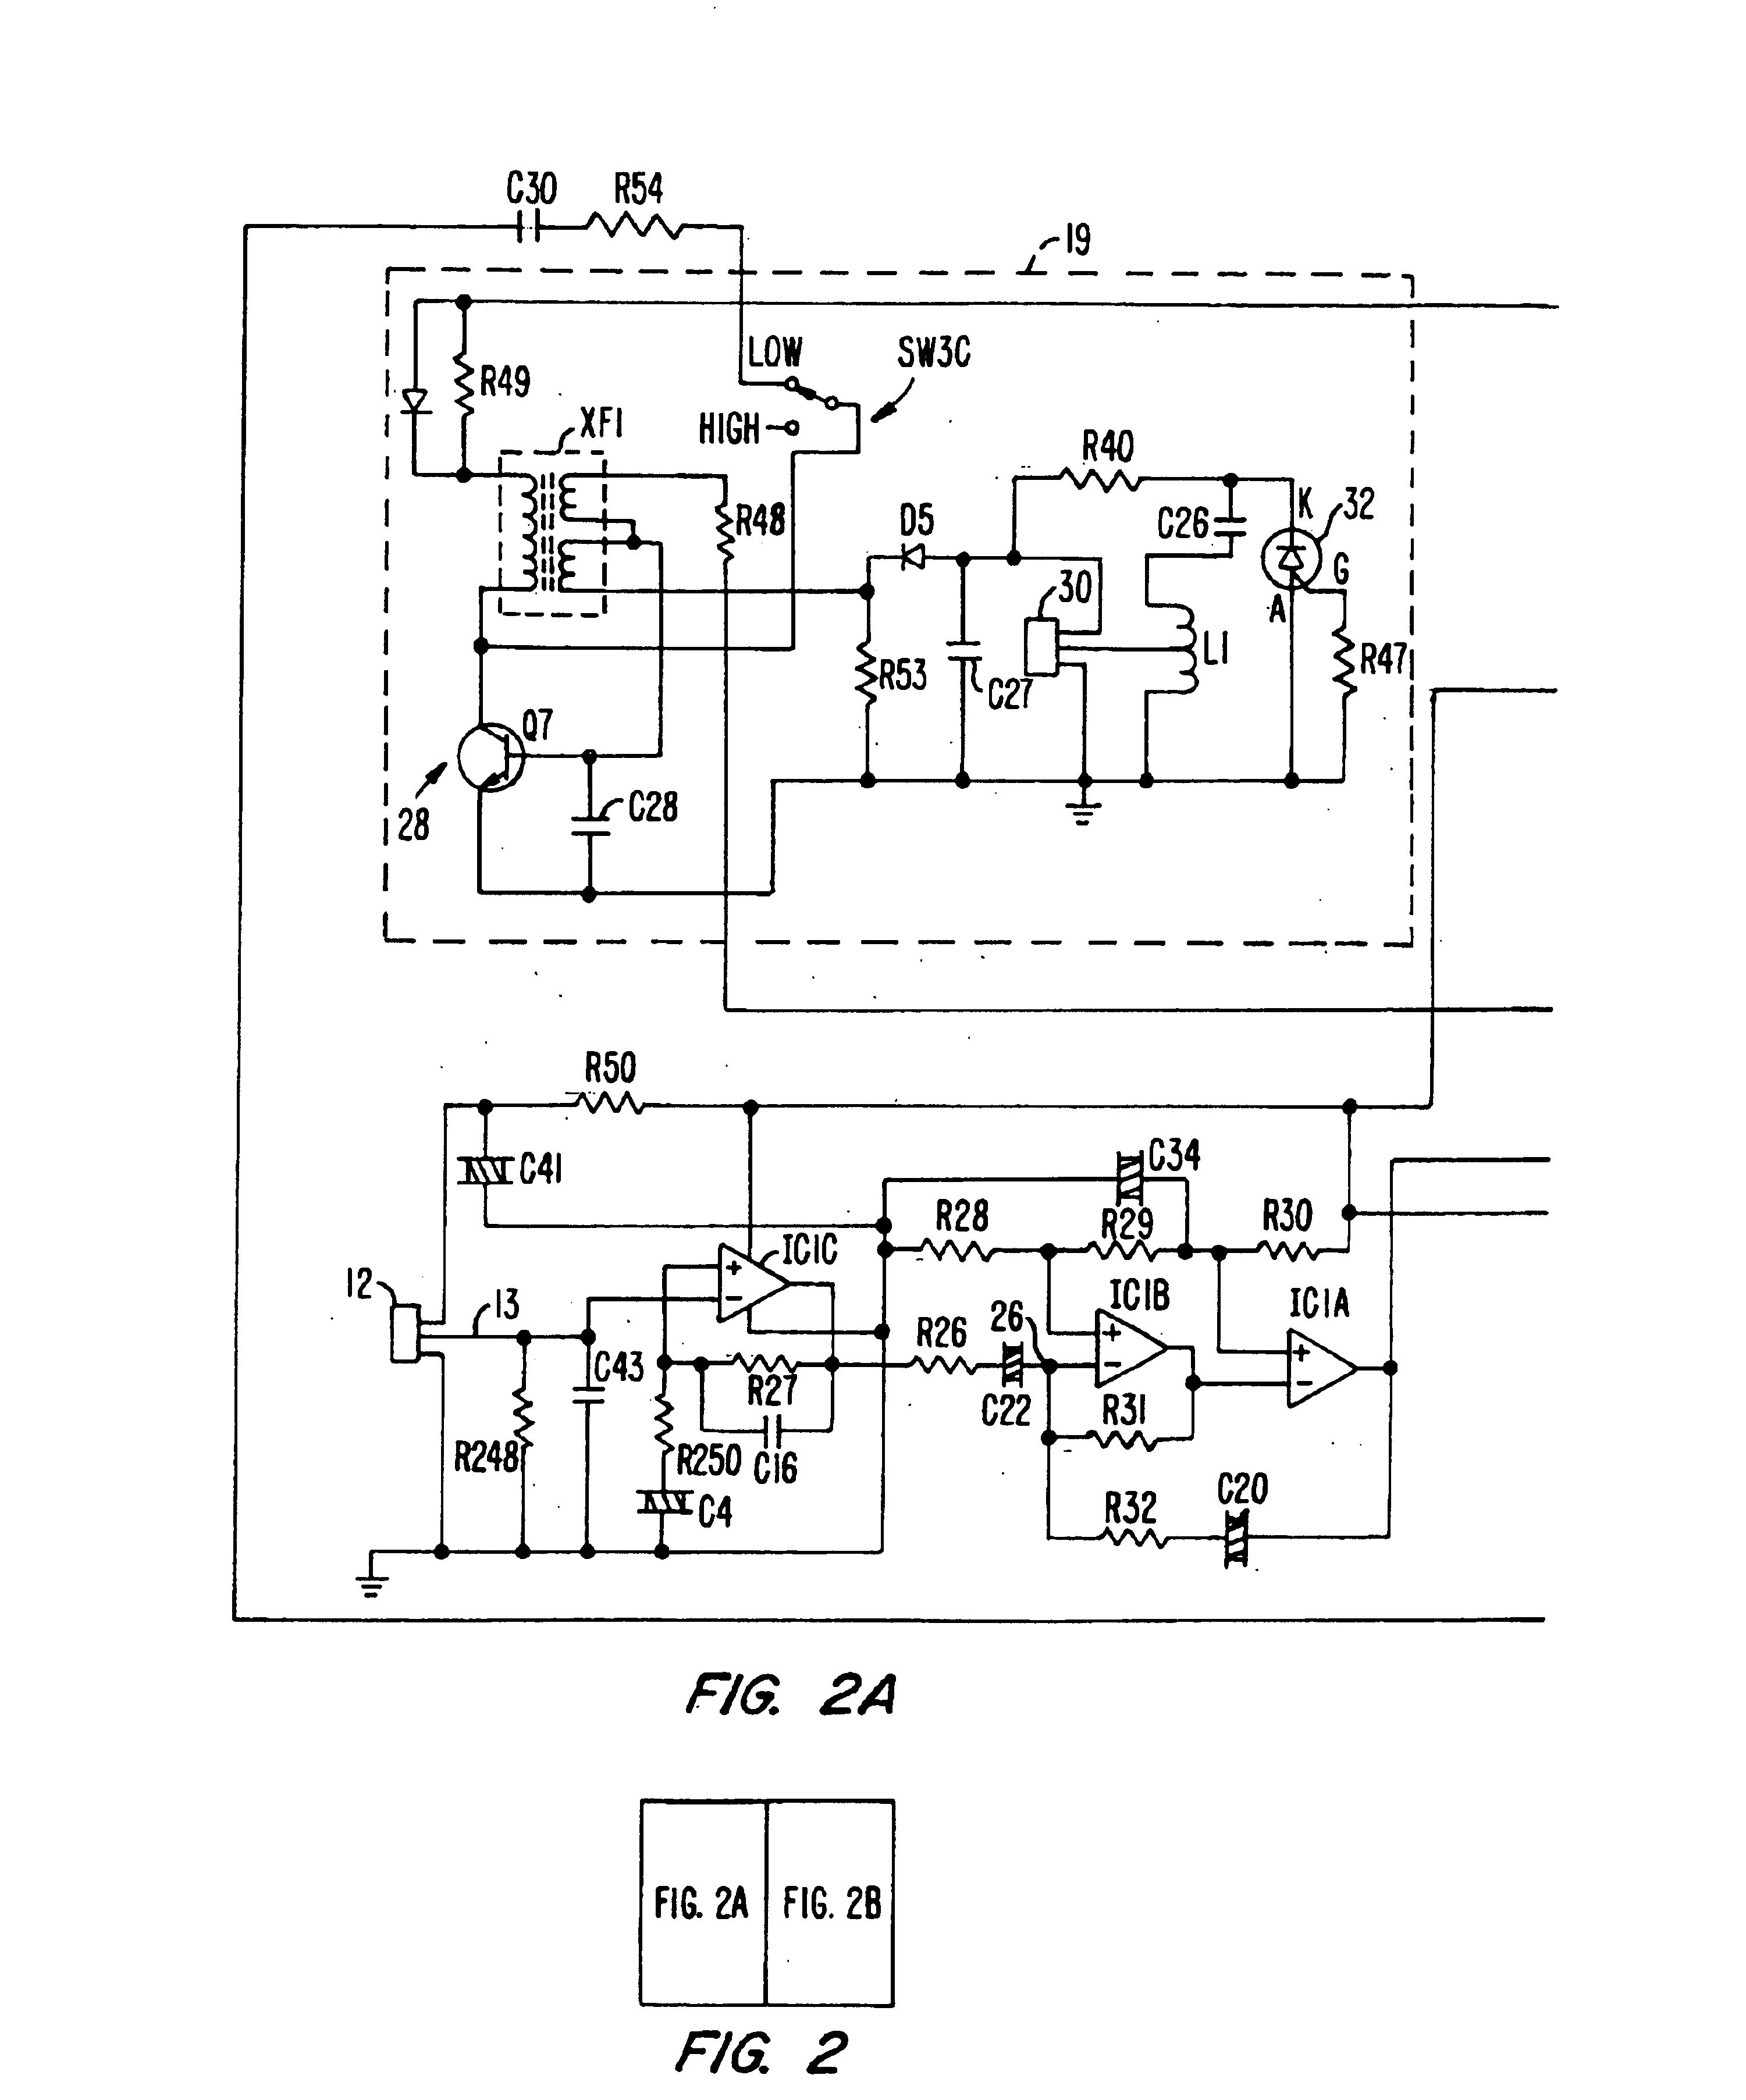 Method and apparatus for pest deterrence